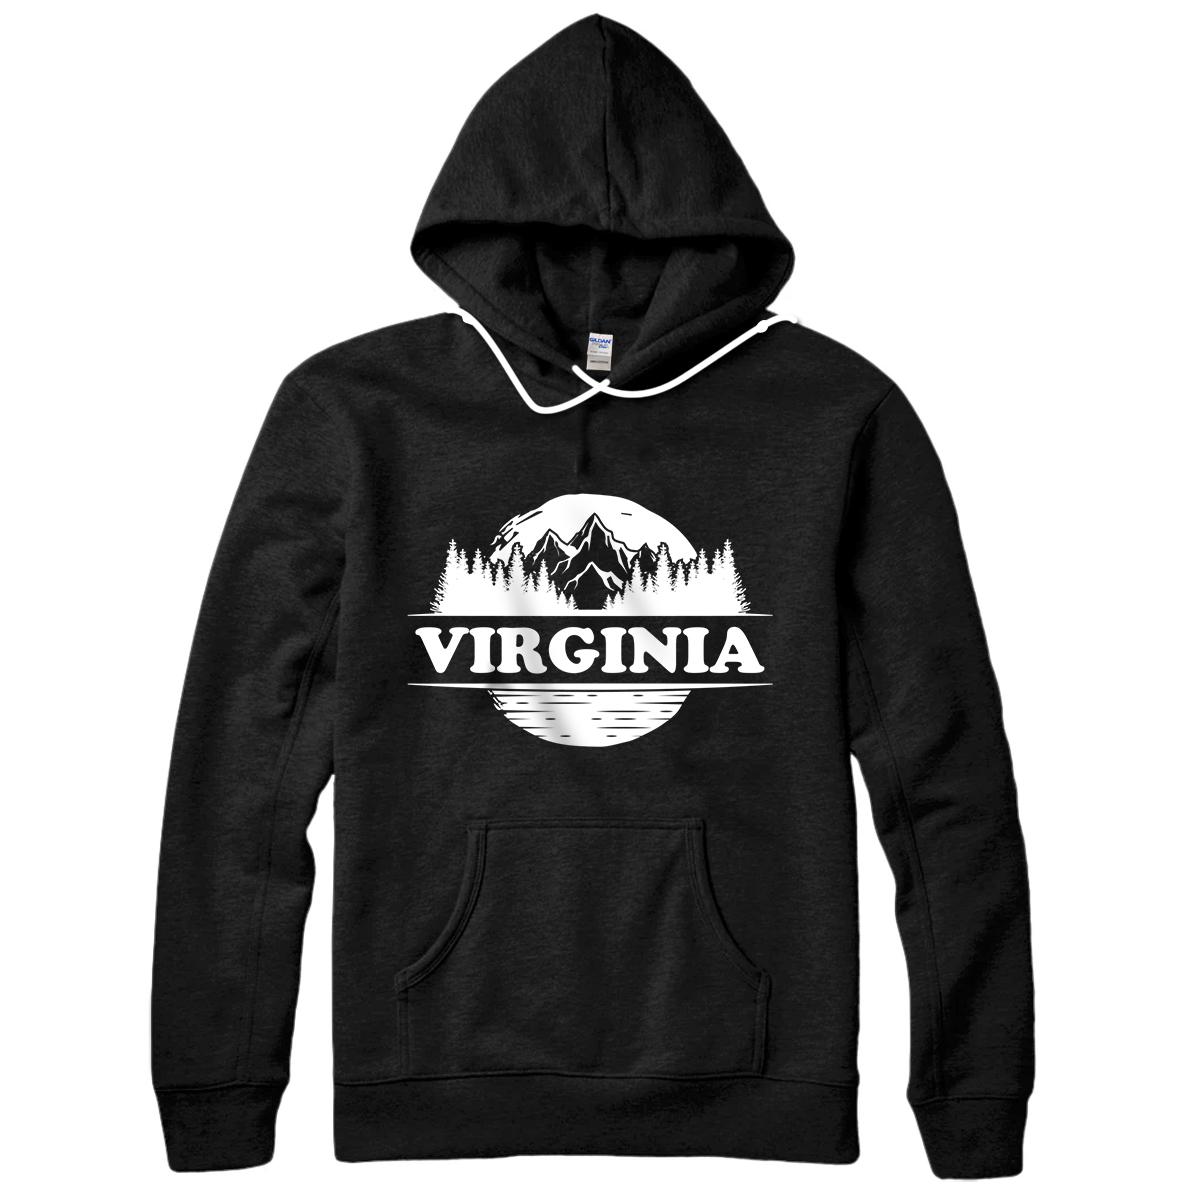 Personalized Virginia Vintage Richmond Mountain Camping Hiking Souvenir Pullover Hoodie